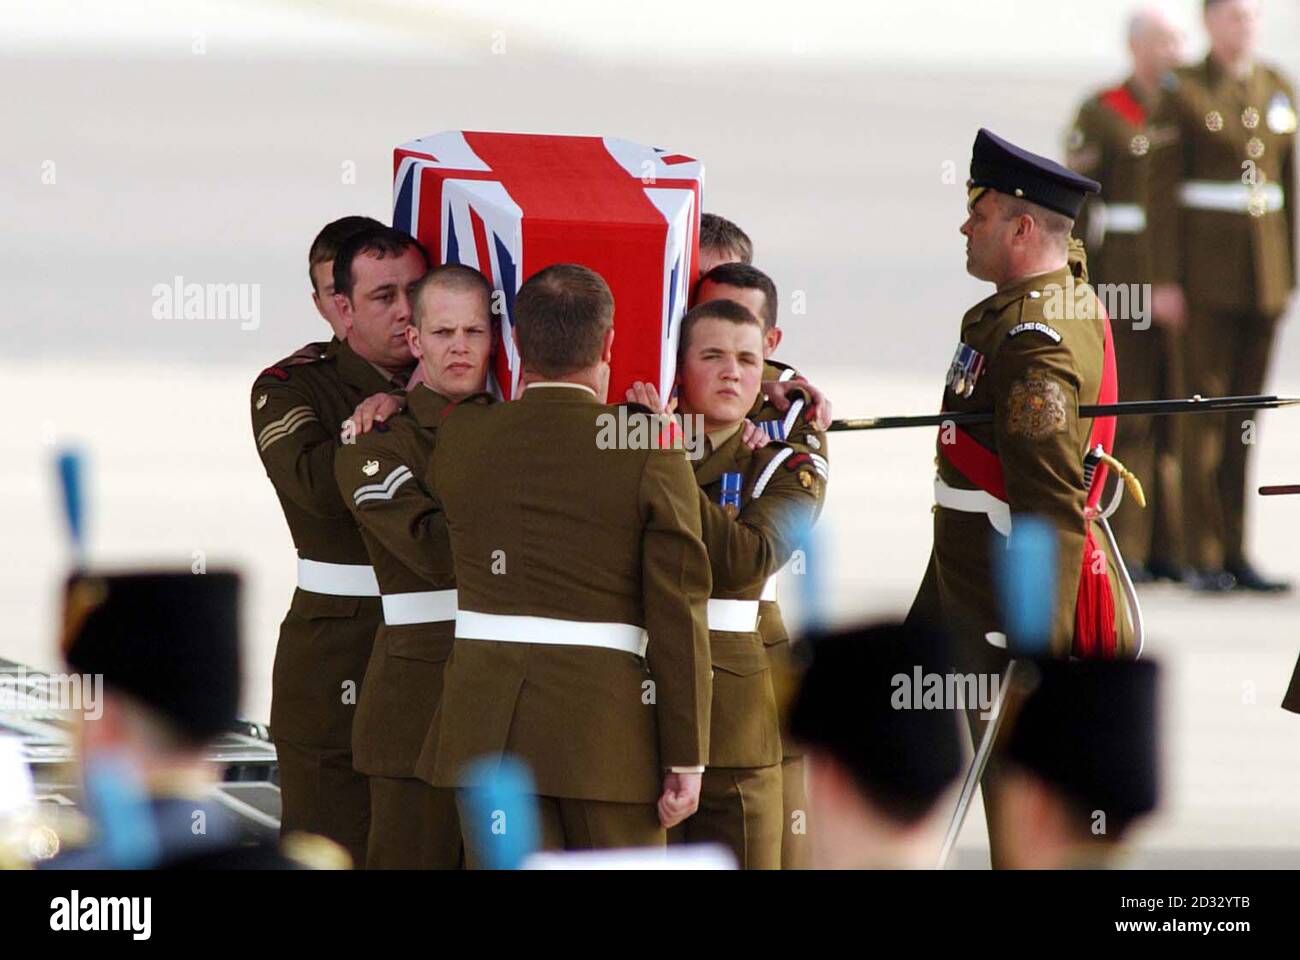 The body of Lance Corporal Karl Shearer arrives at RAF Brize Norton.     * Lance Corporal Shearer, 24, of the Blues and Royals (Household Cavalry) was killed in Iraq when his armoured Scimitar light tank overturned in an accident in which the vehicle commander was also injured. He was married and leaves a three-year-old daughter. He was from Windsor, Berkshire, and joined the Army in 1995. The bodies of seven British servicemen killed in the Iraq conflict were arriving at the Oxfordshire air base for the solemn repatriation ceremony. The return of the seven bodies brings the number of killed s Stock Photo